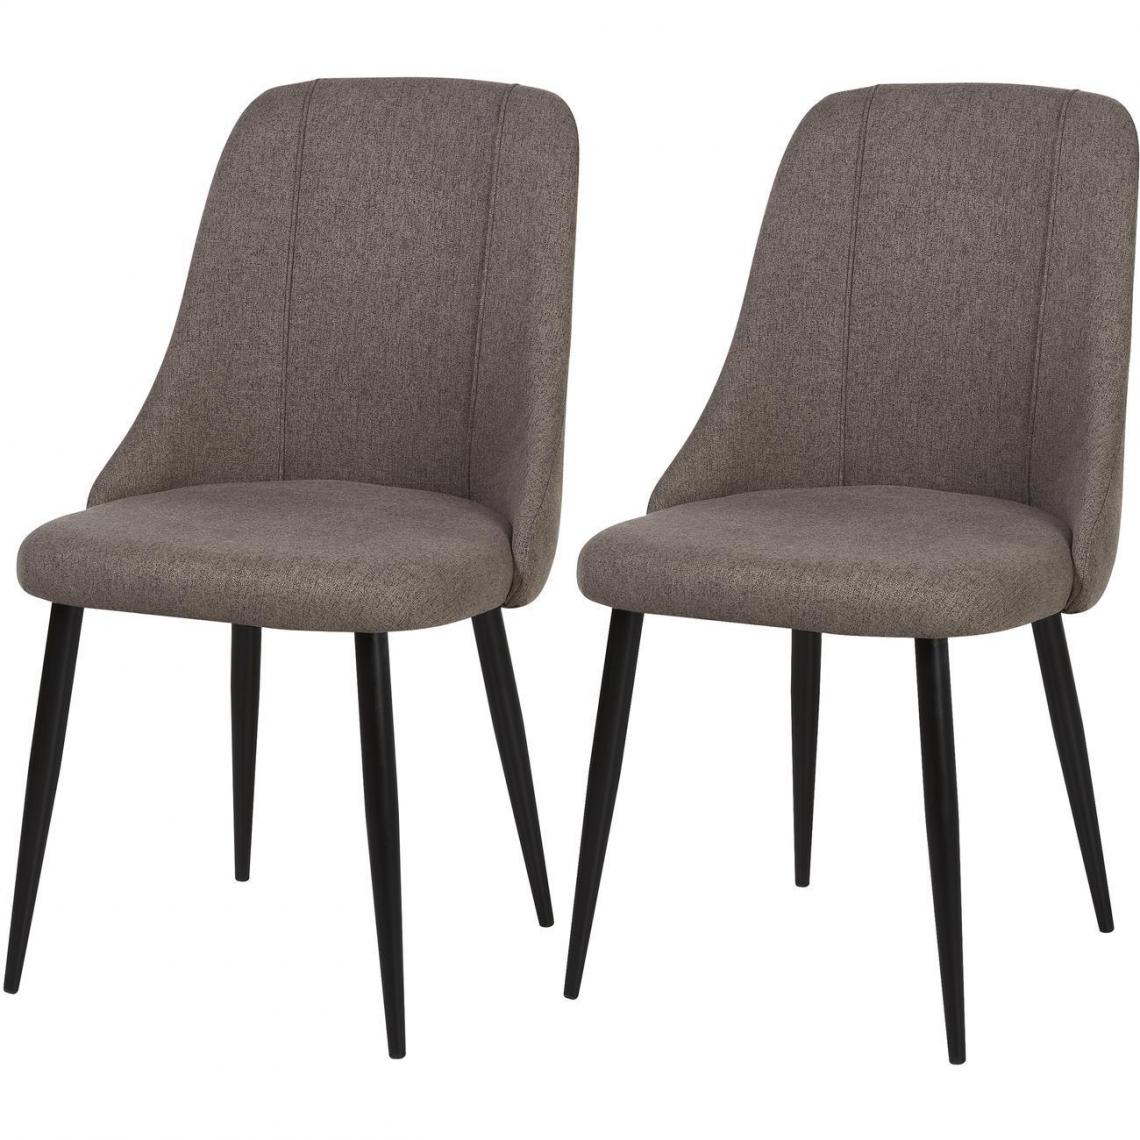 ATHM DESIGN - Lot de 2 - Chaise YAY Gris Anthracite - assise Tissu pieds Metal - Chaises